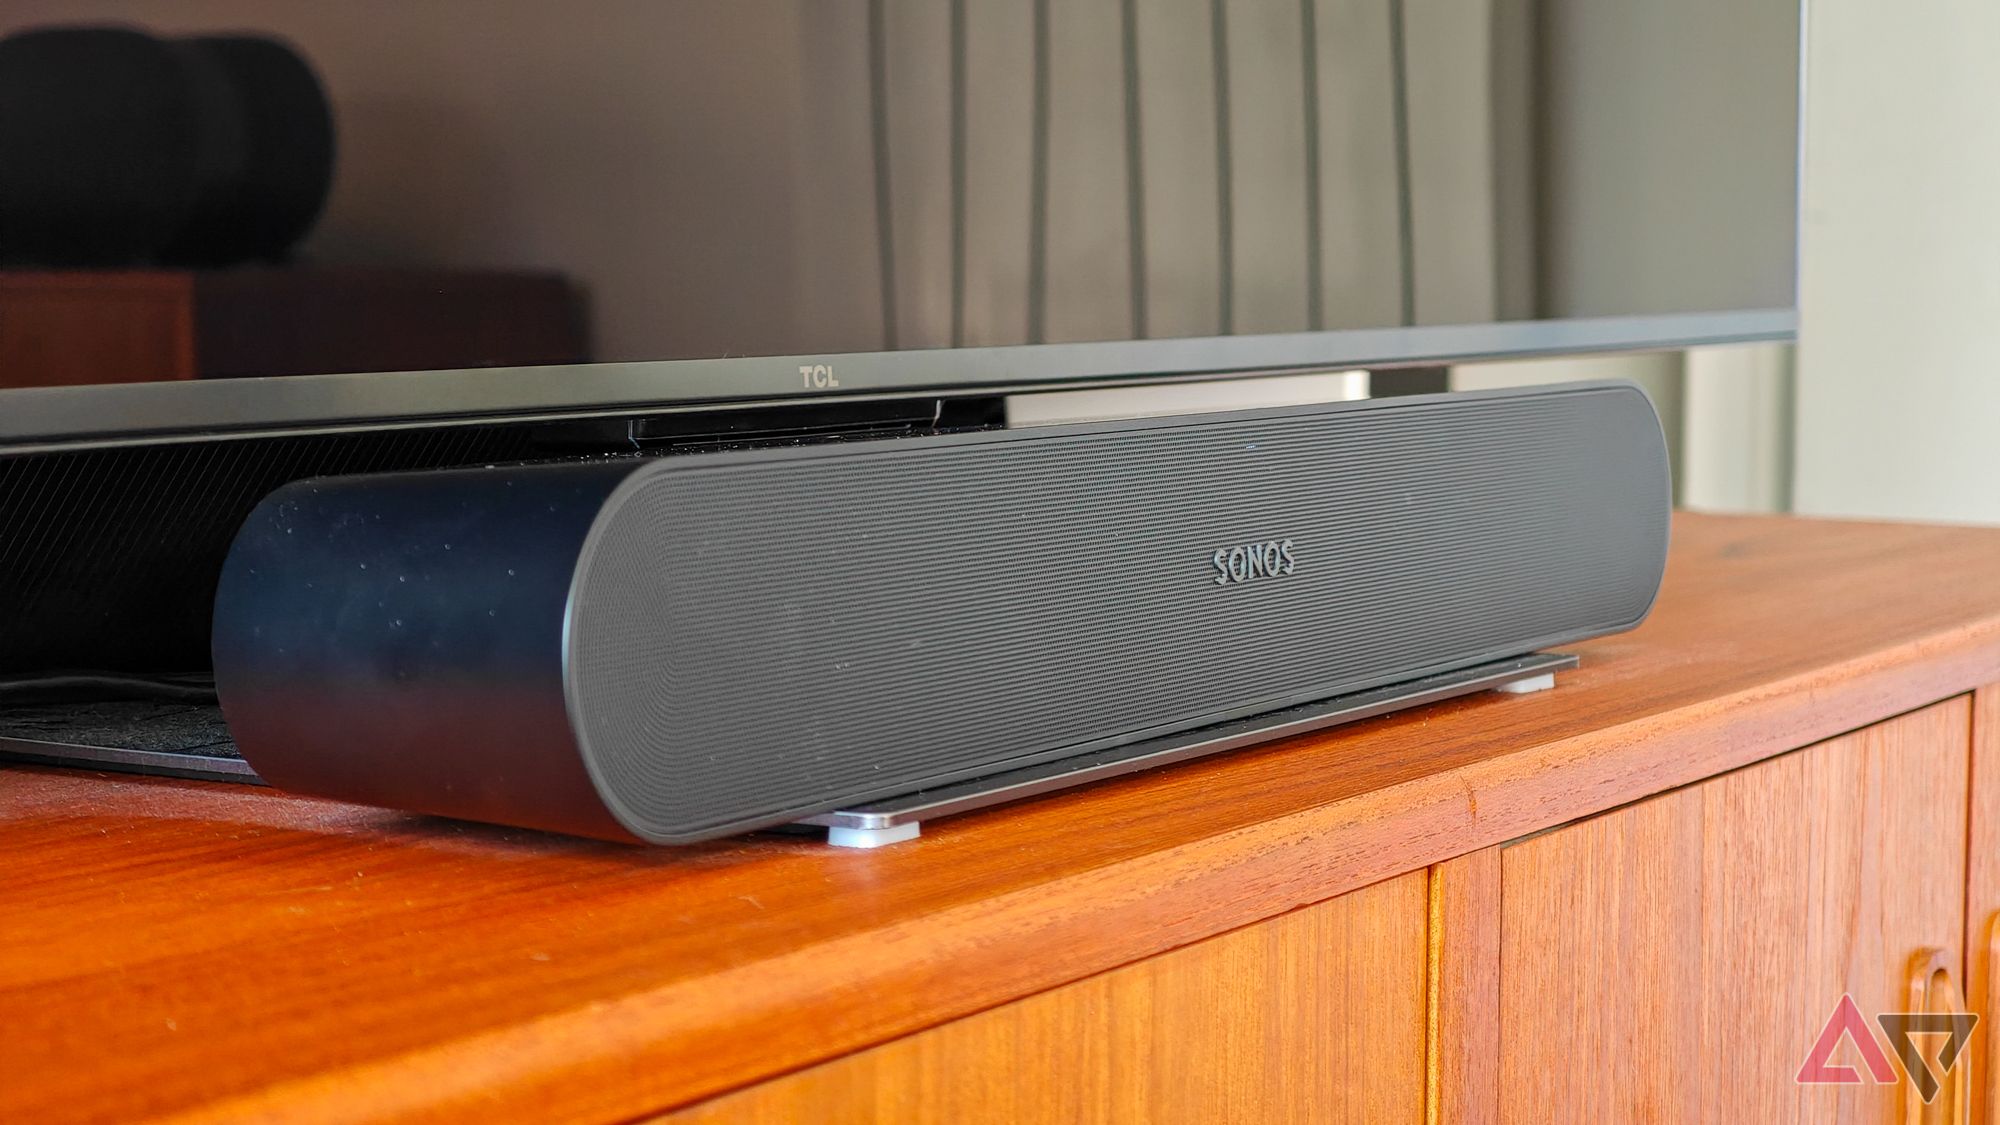 Sonos Ray soundbar on a wooden sideboard below a TV with a blank screen